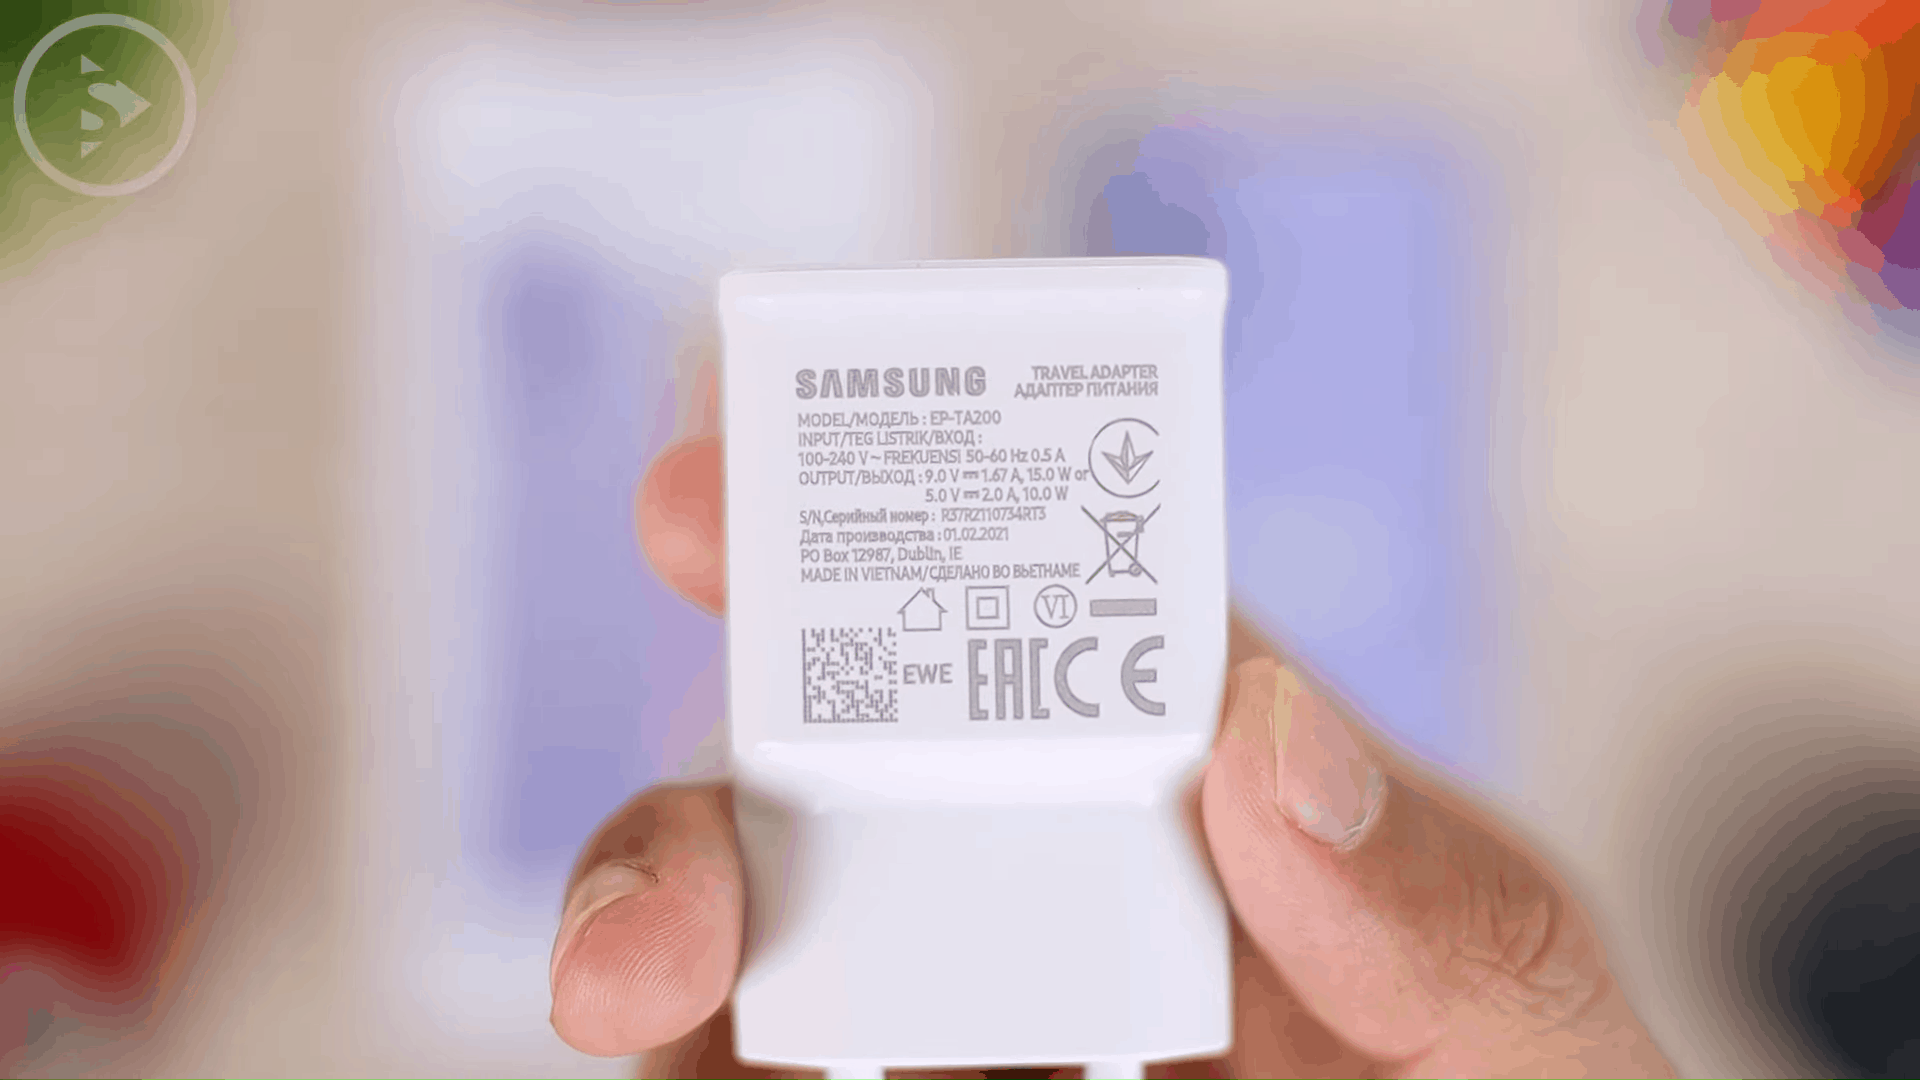 Charger Adapter 15W for Galaxy A32 - Unboxing Samsung Galaxy A32 90Hz AMOLED screen, 5000mAH battery and 64MP Camera